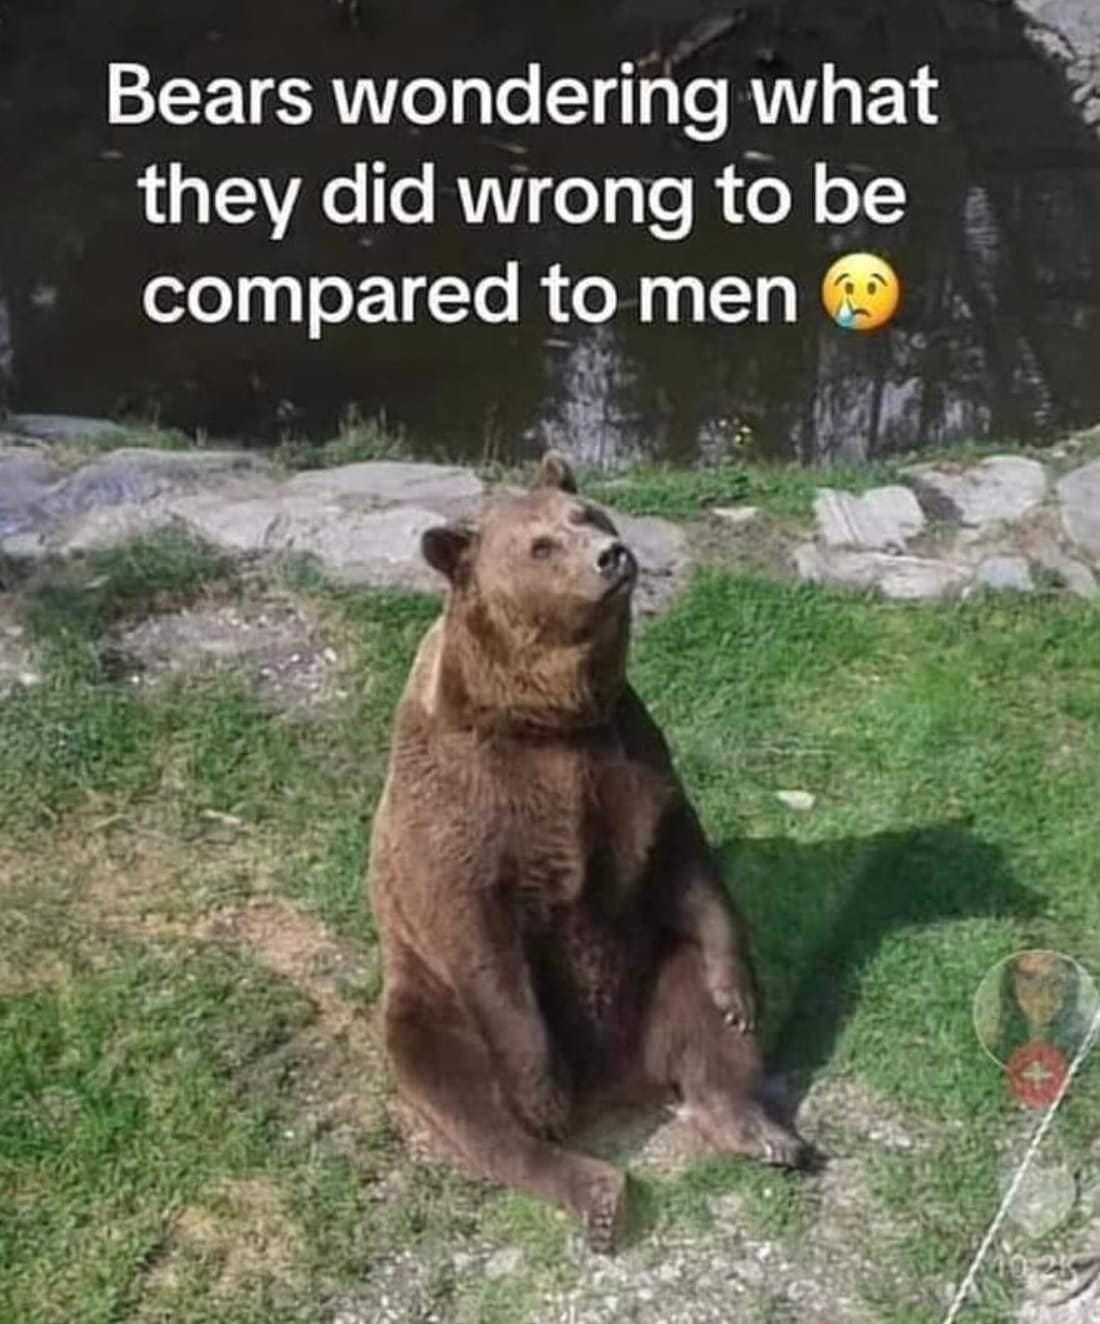 Sad bear, sitting in a meadow, with caption "Bears wondering what they did wrong to be compared to men"